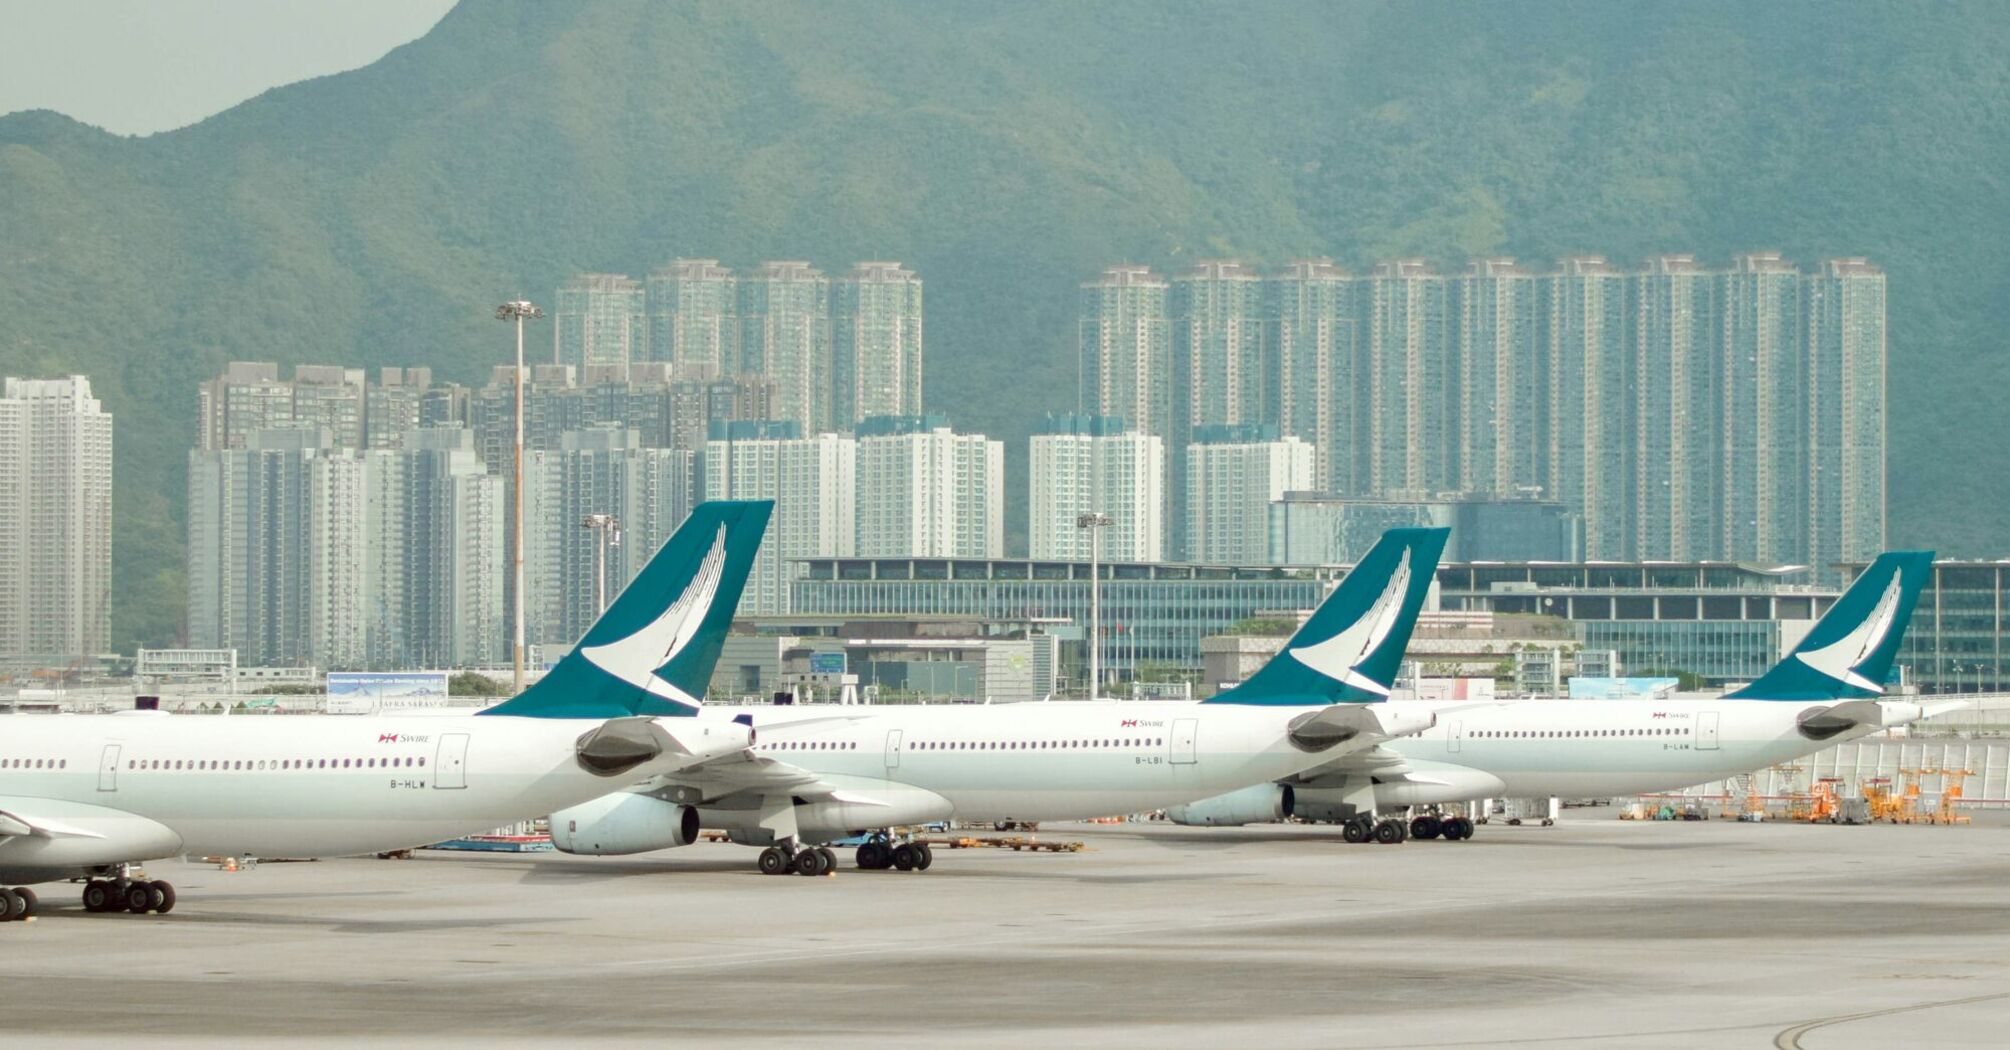 Cathay Pacific aircraft lined up at an airport with high-rise buildings and mountains in the background